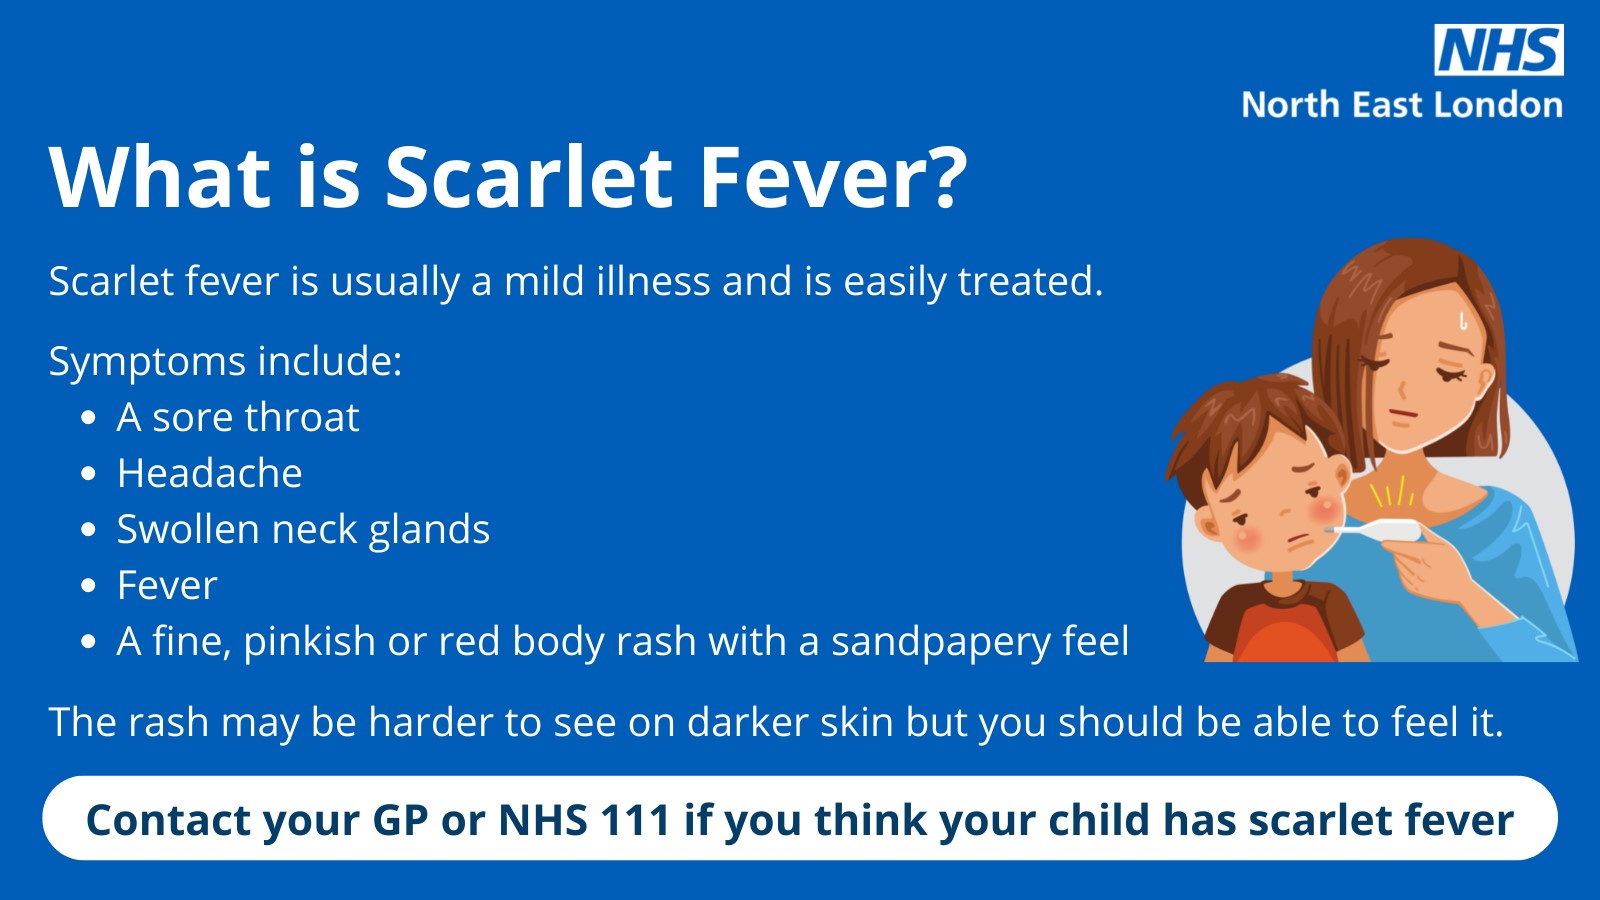 Strep Throat and Scarlet Fever: What's the Connection?